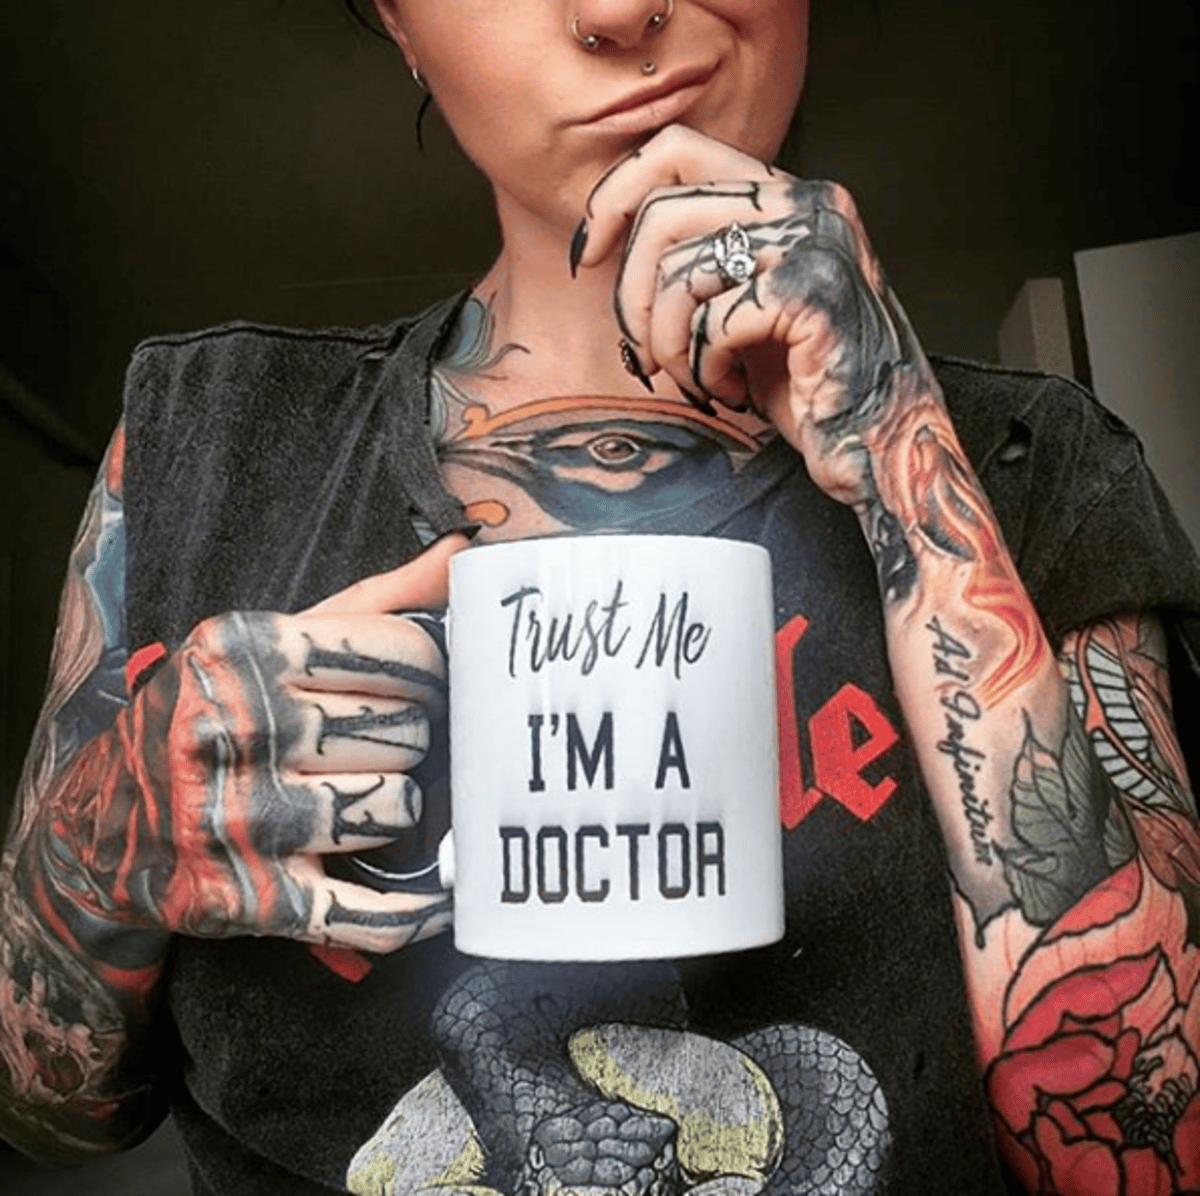 Meet the Heavily Tattooed Doctor Taking Over the Medical Field